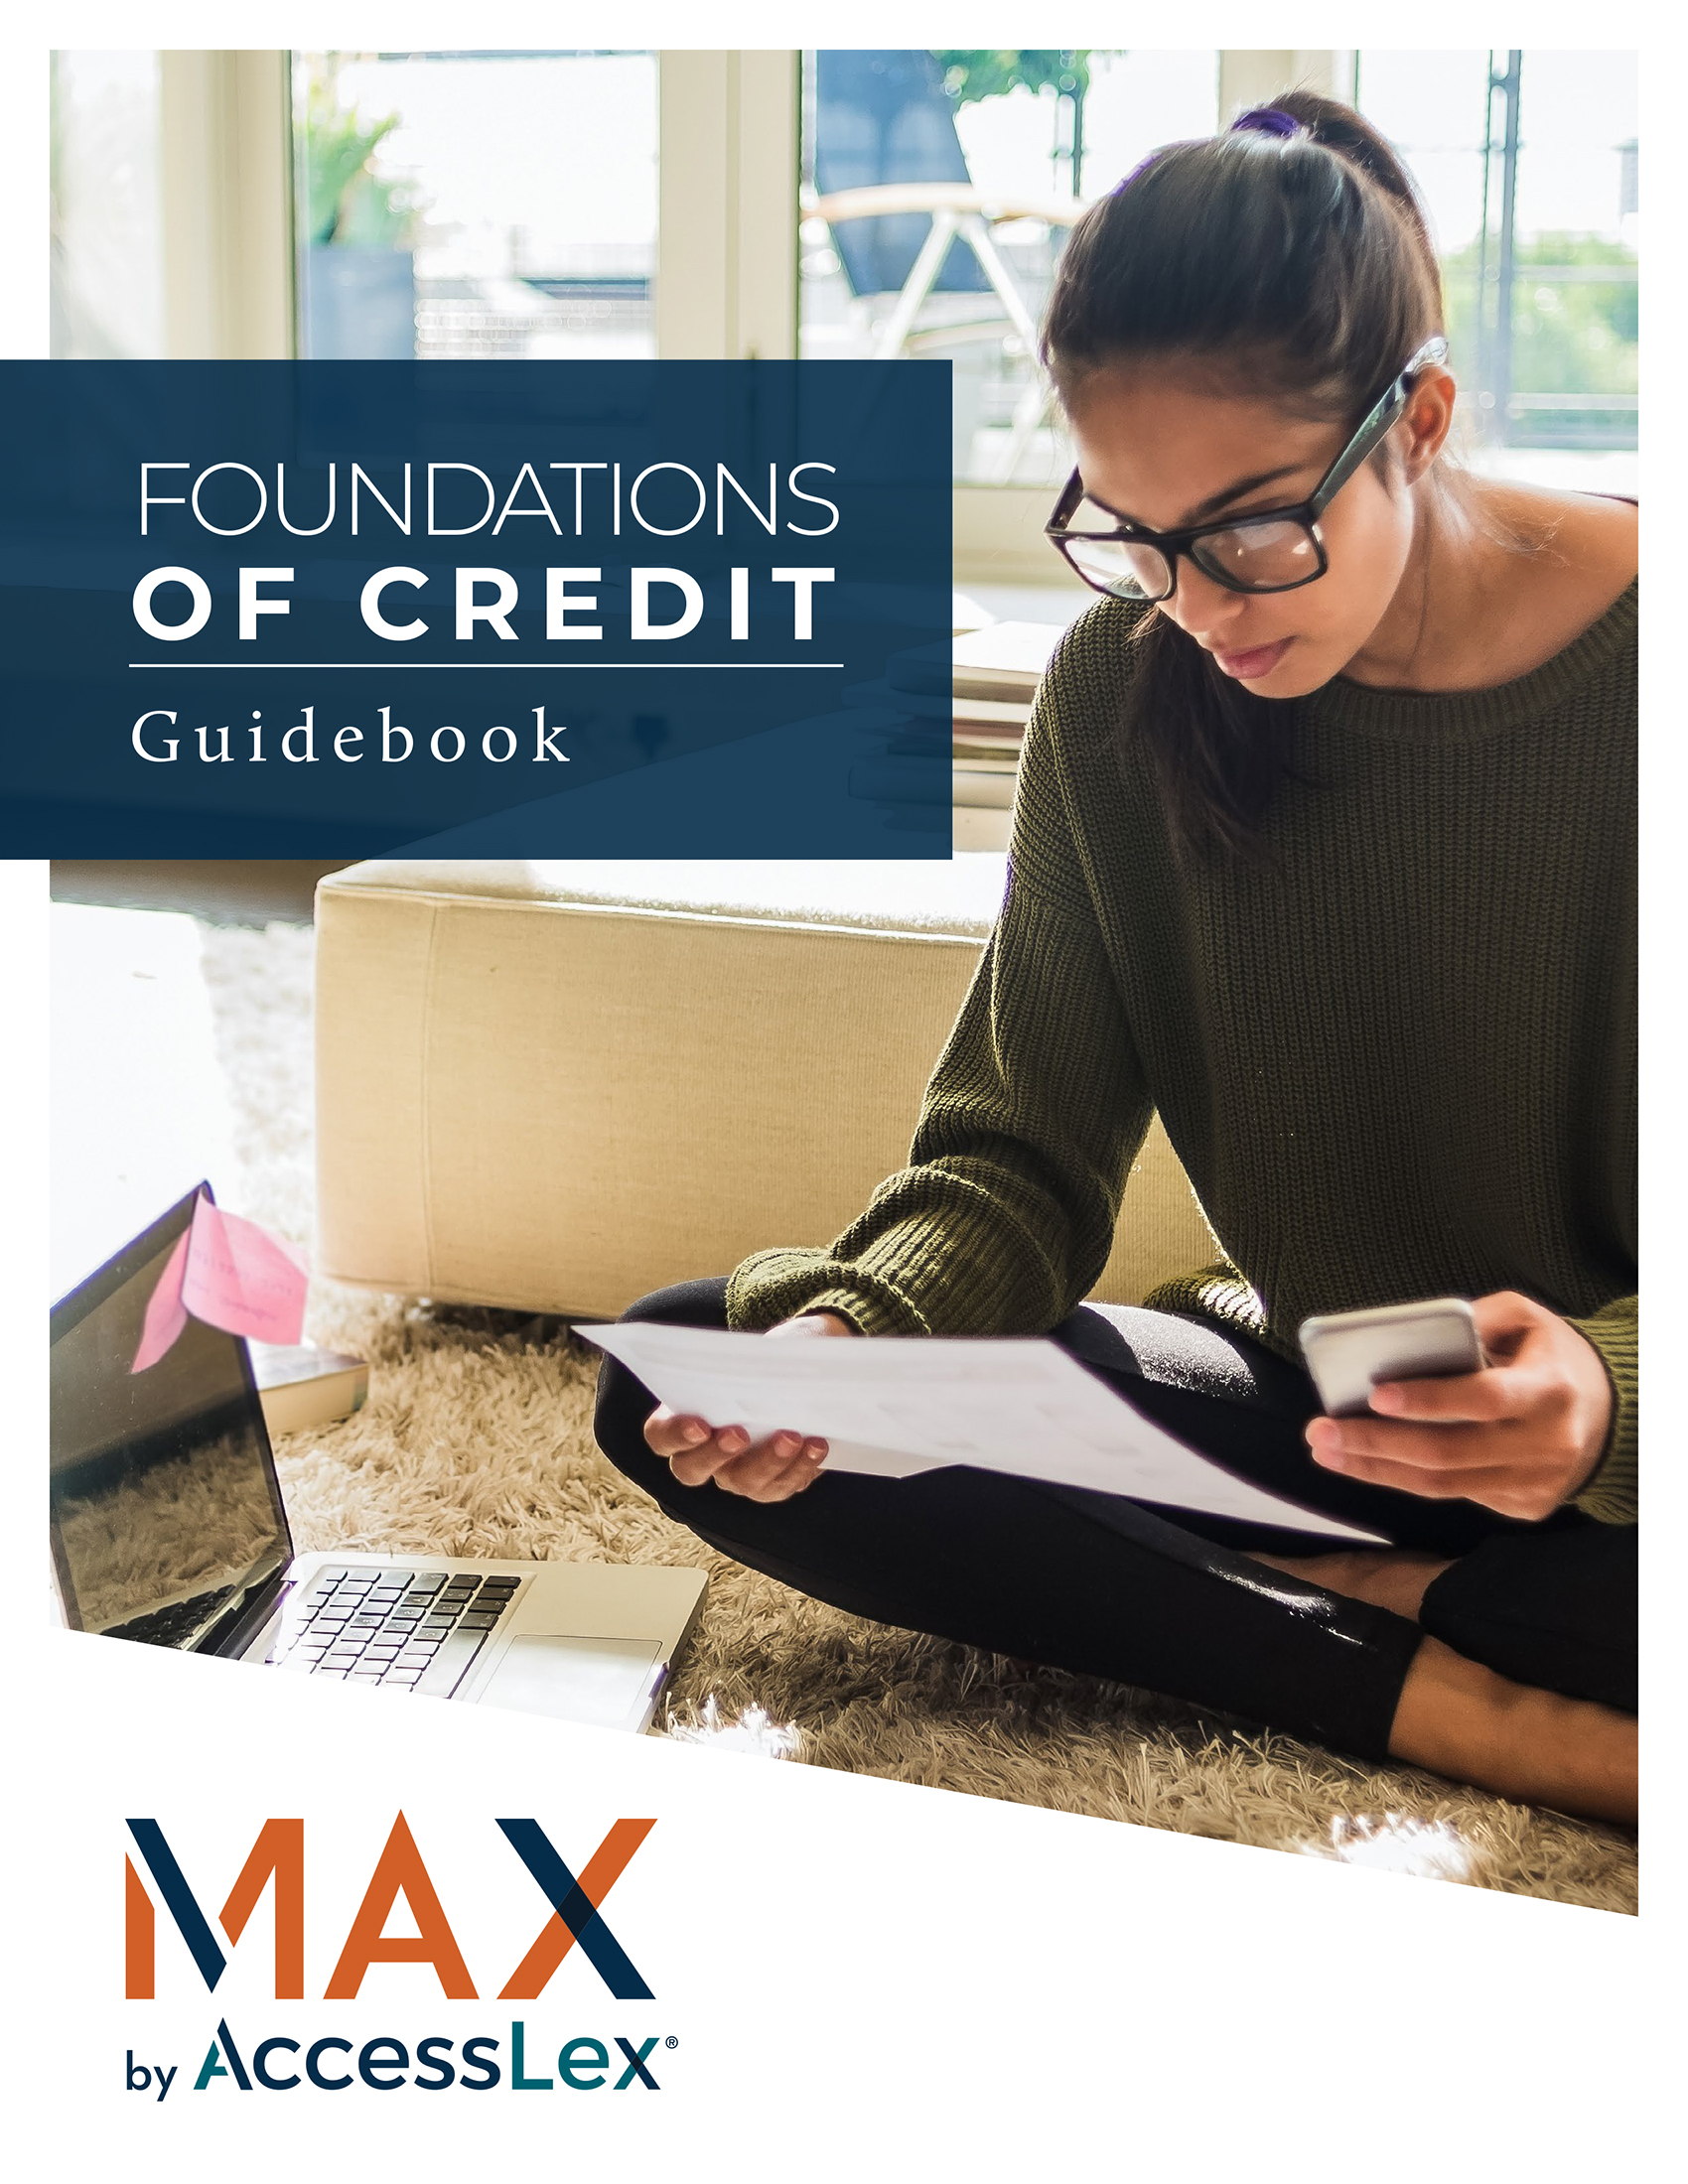 Foundations of Credit Guidebook cover